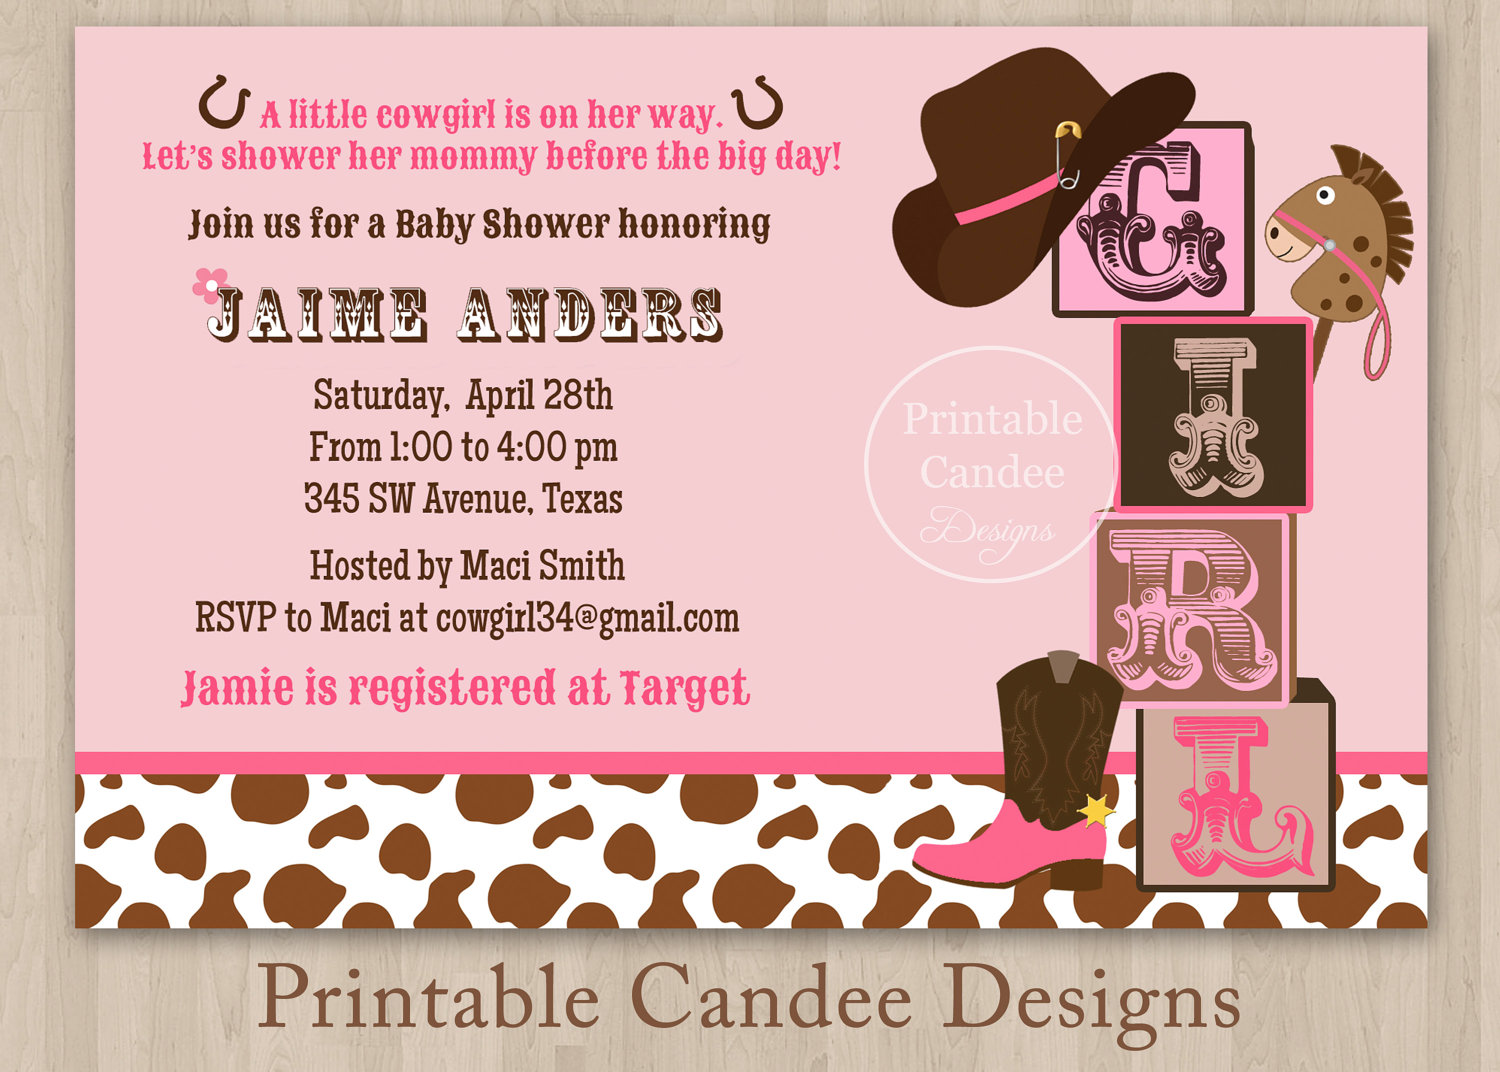 Full Size of Baby Shower:63+ Delightful Cheap Baby Shower Invitations Image Inspirations Cheap Baby Shower Invitations Cowbaby Shower Invitations